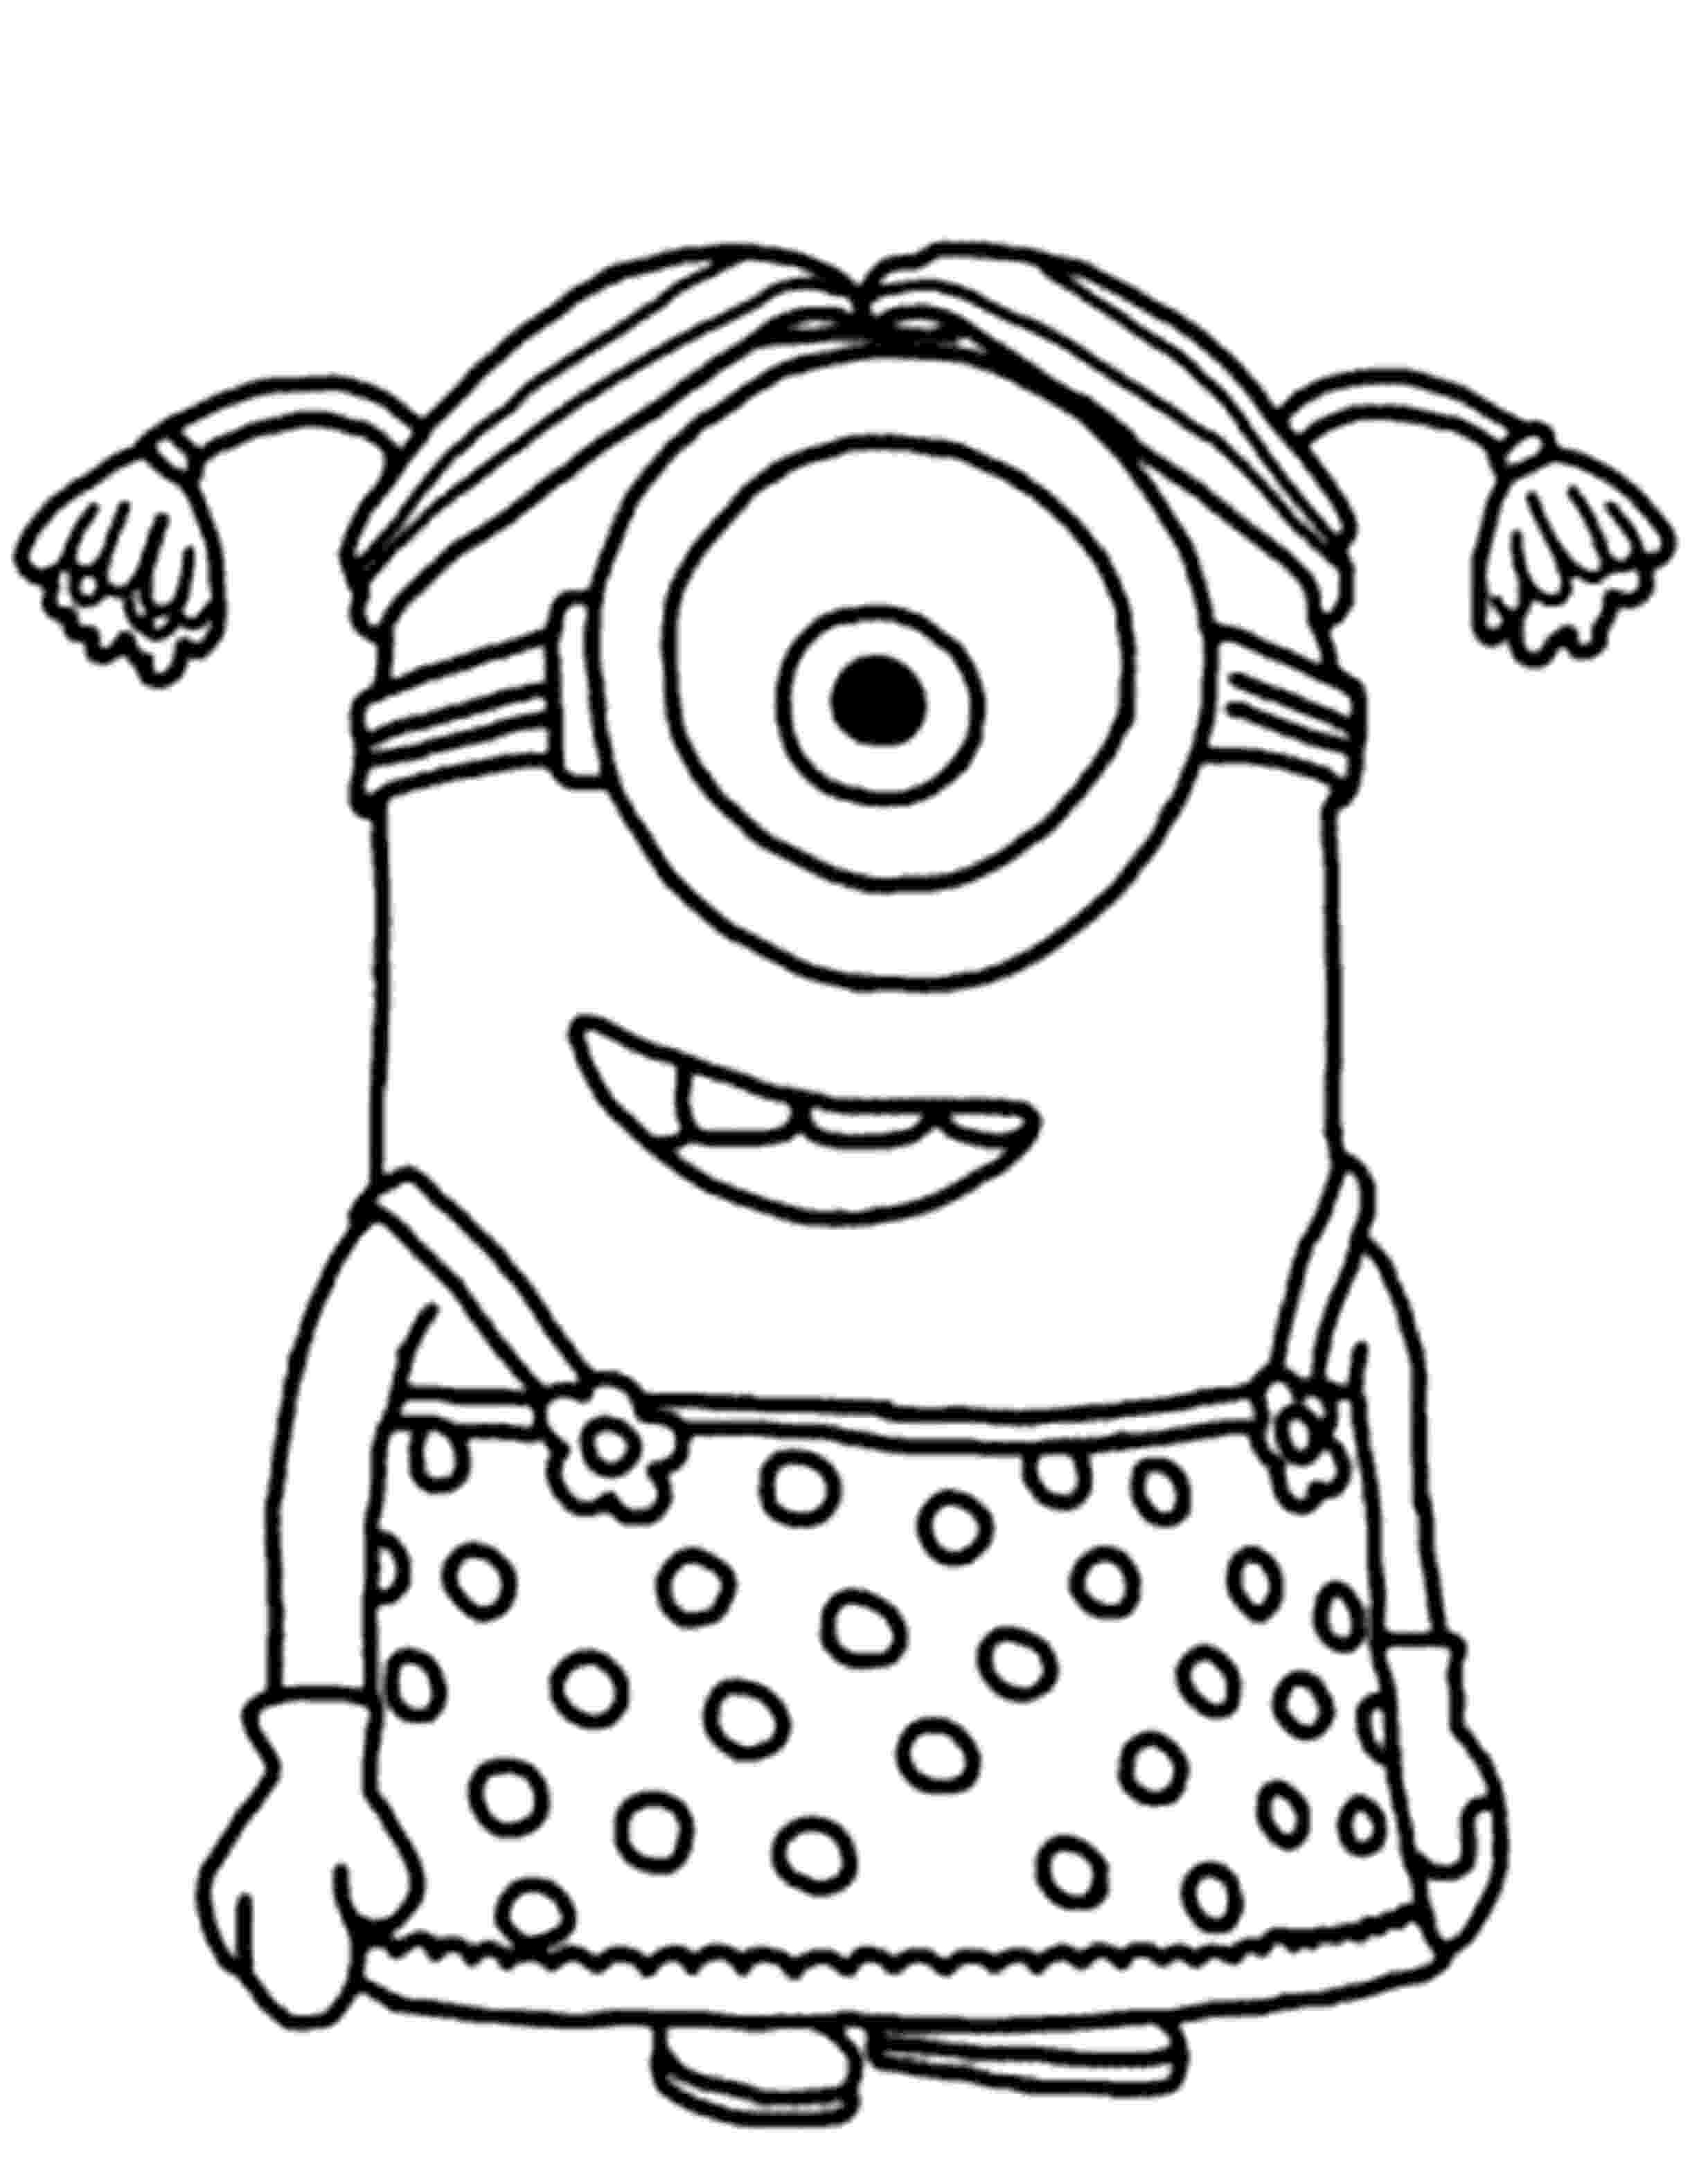 coloring pages online minions cool minions coloring pages wecoloringpage pinterest coloring online minions pages 